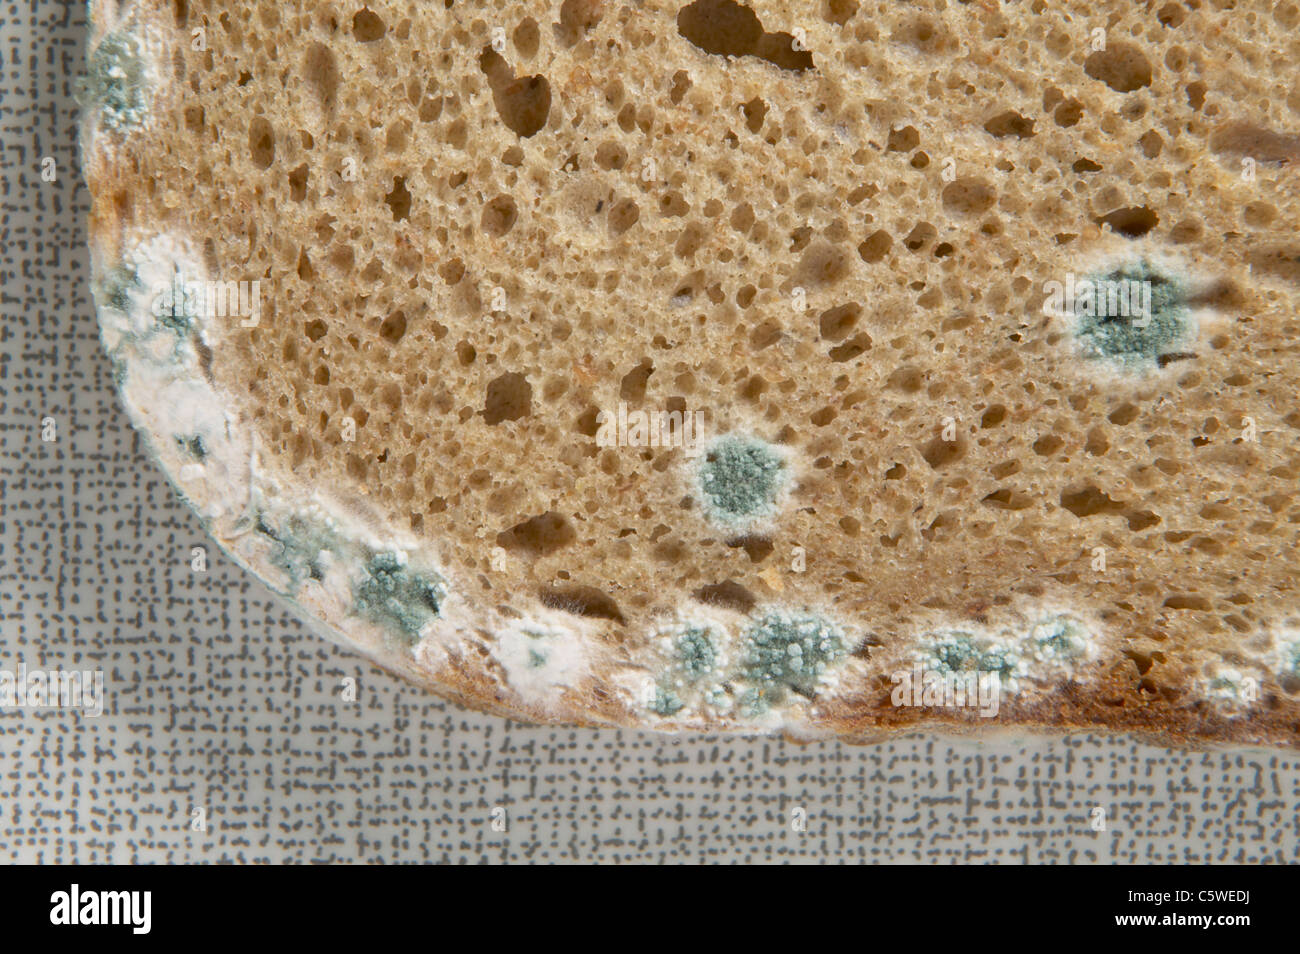 Mold on bread close up stock image. Image of fungi, eating - 191500871